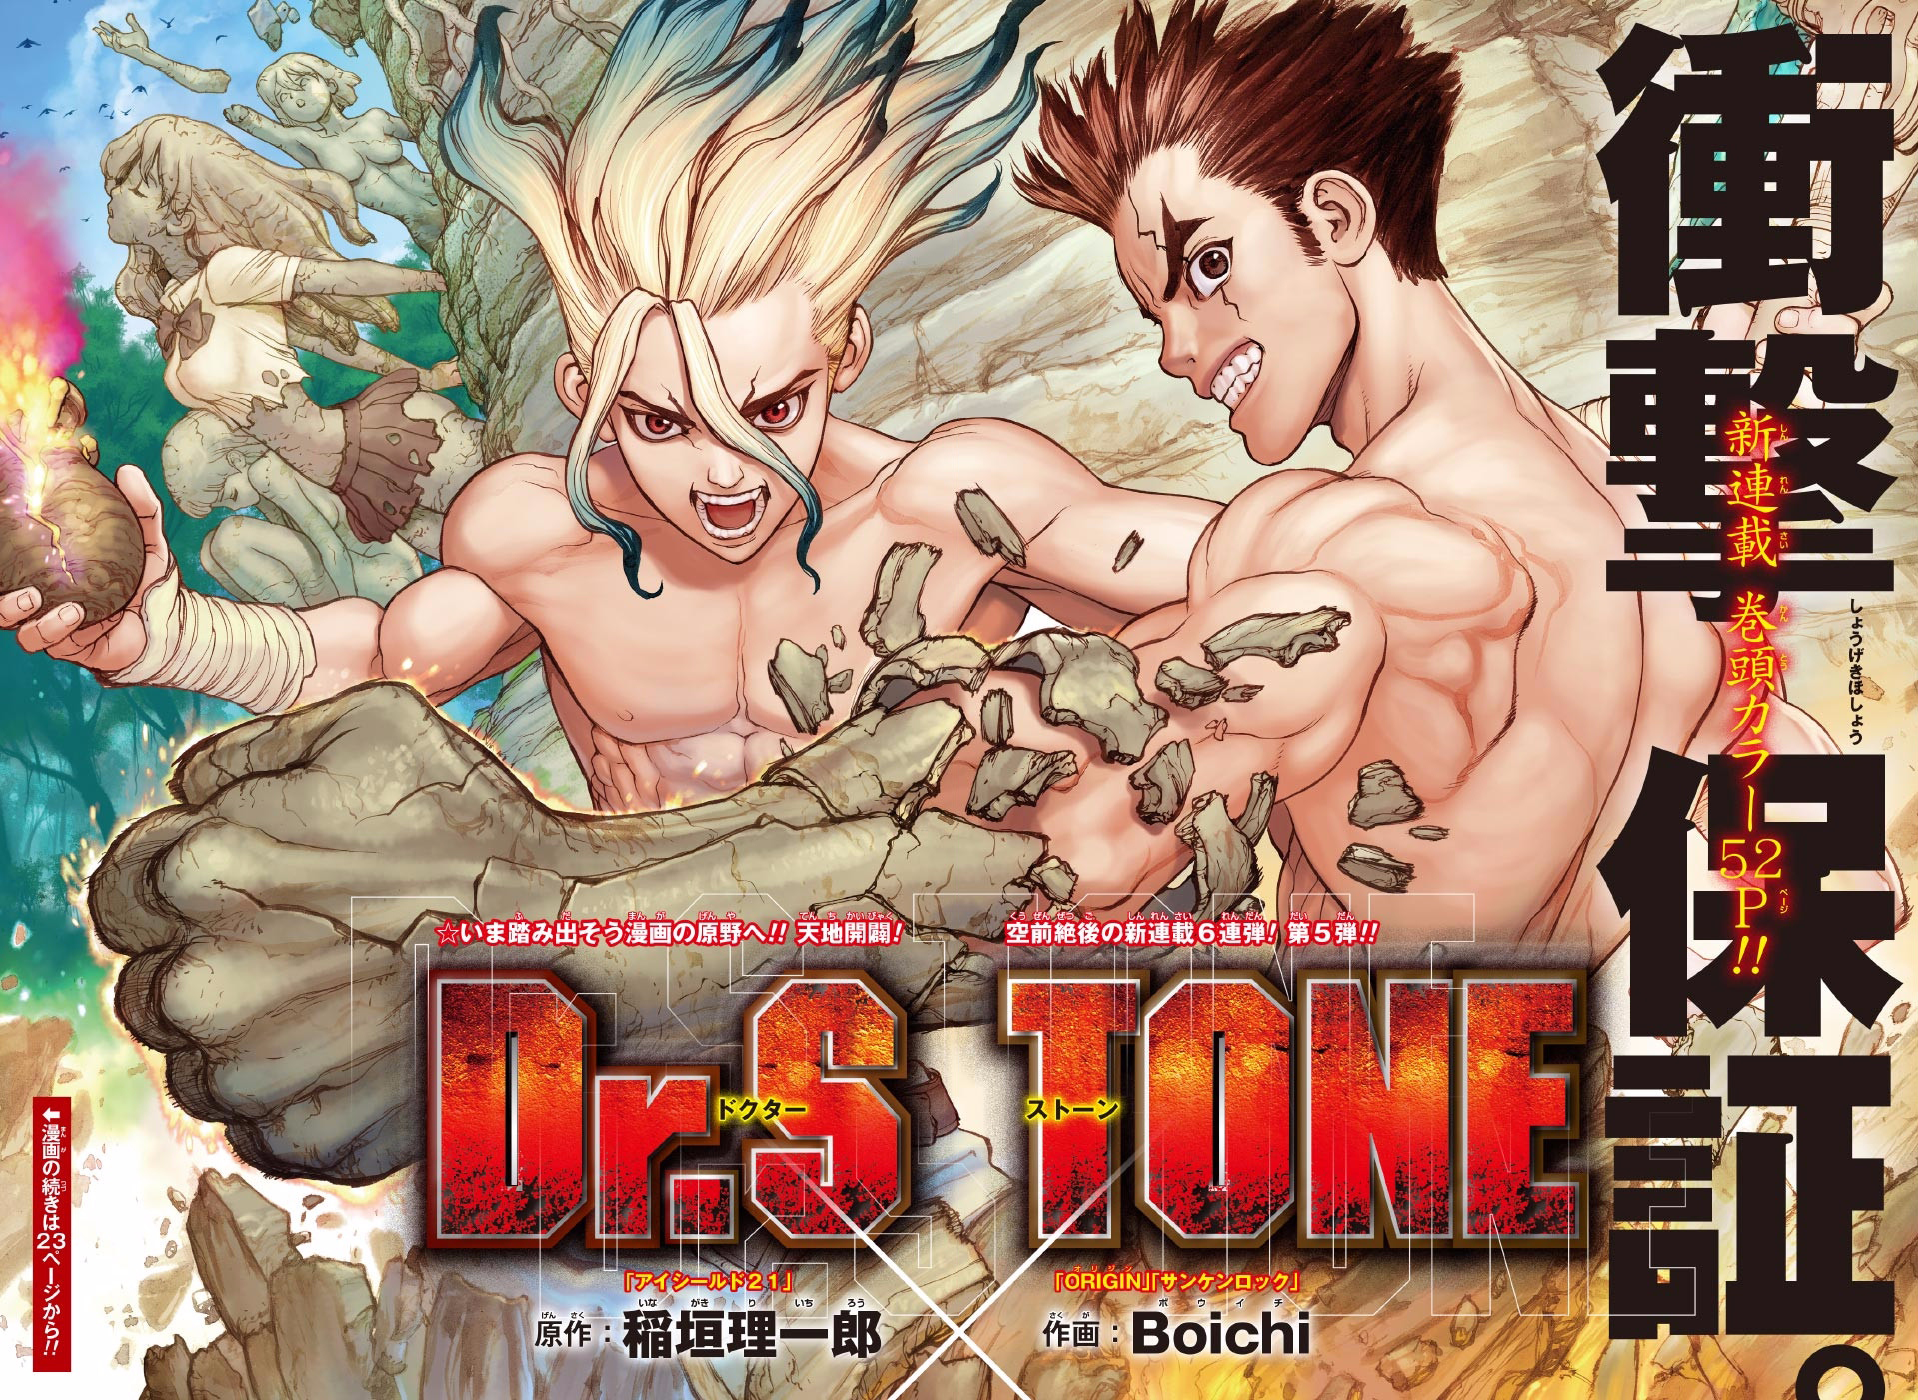 Read Dr. Stone Manga Chapter 156 in English Free Online